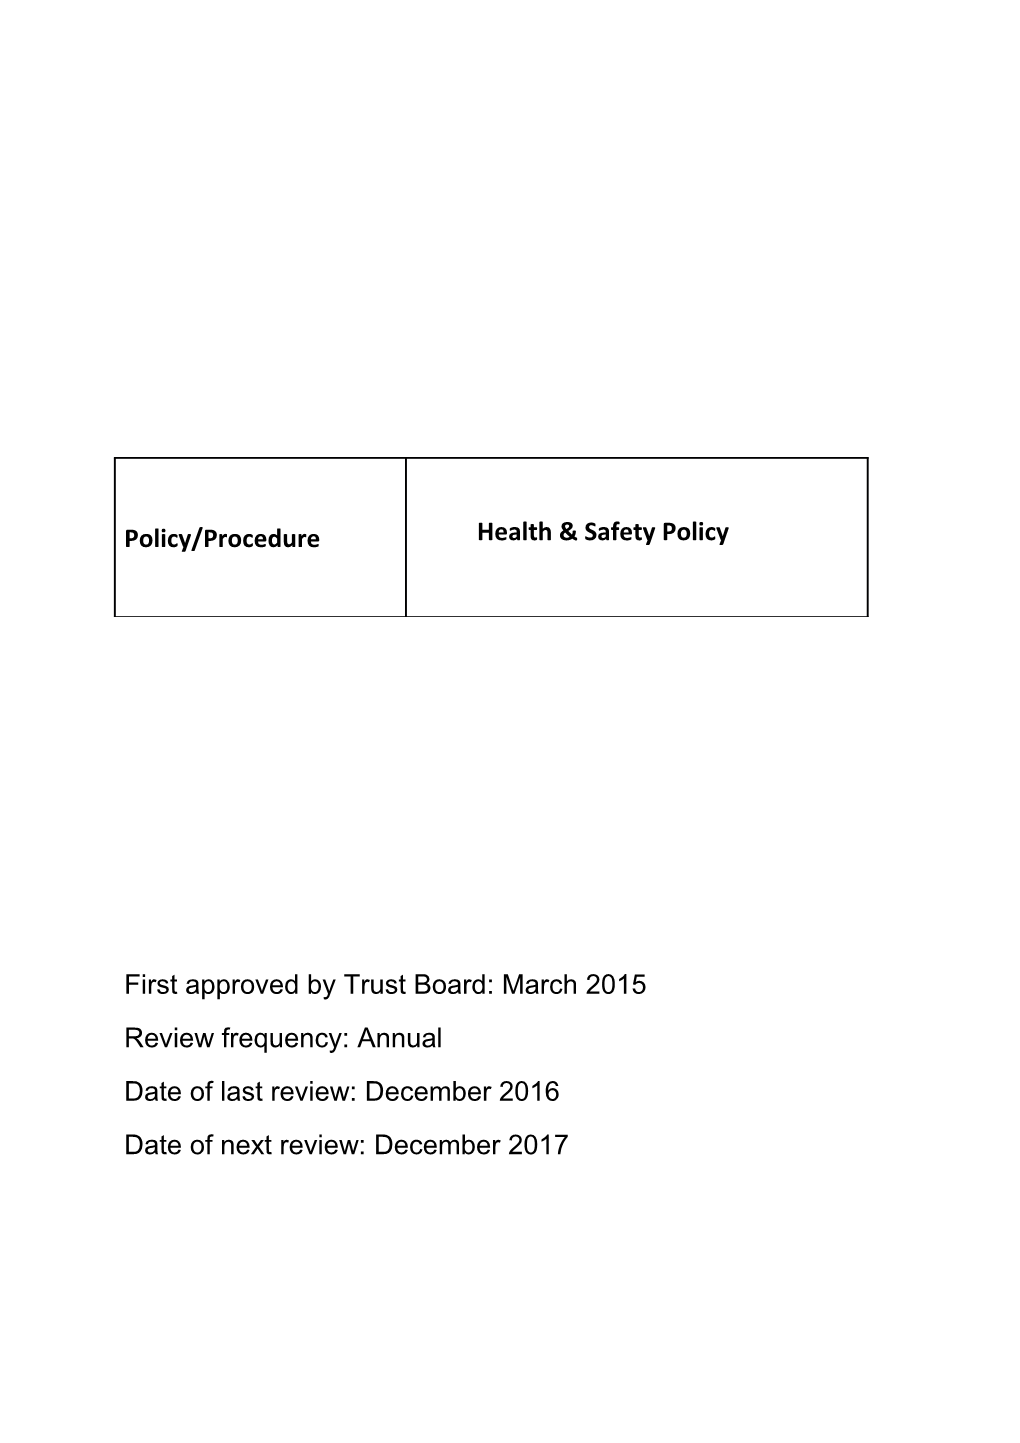 First Approved by Trust Board: March 2015